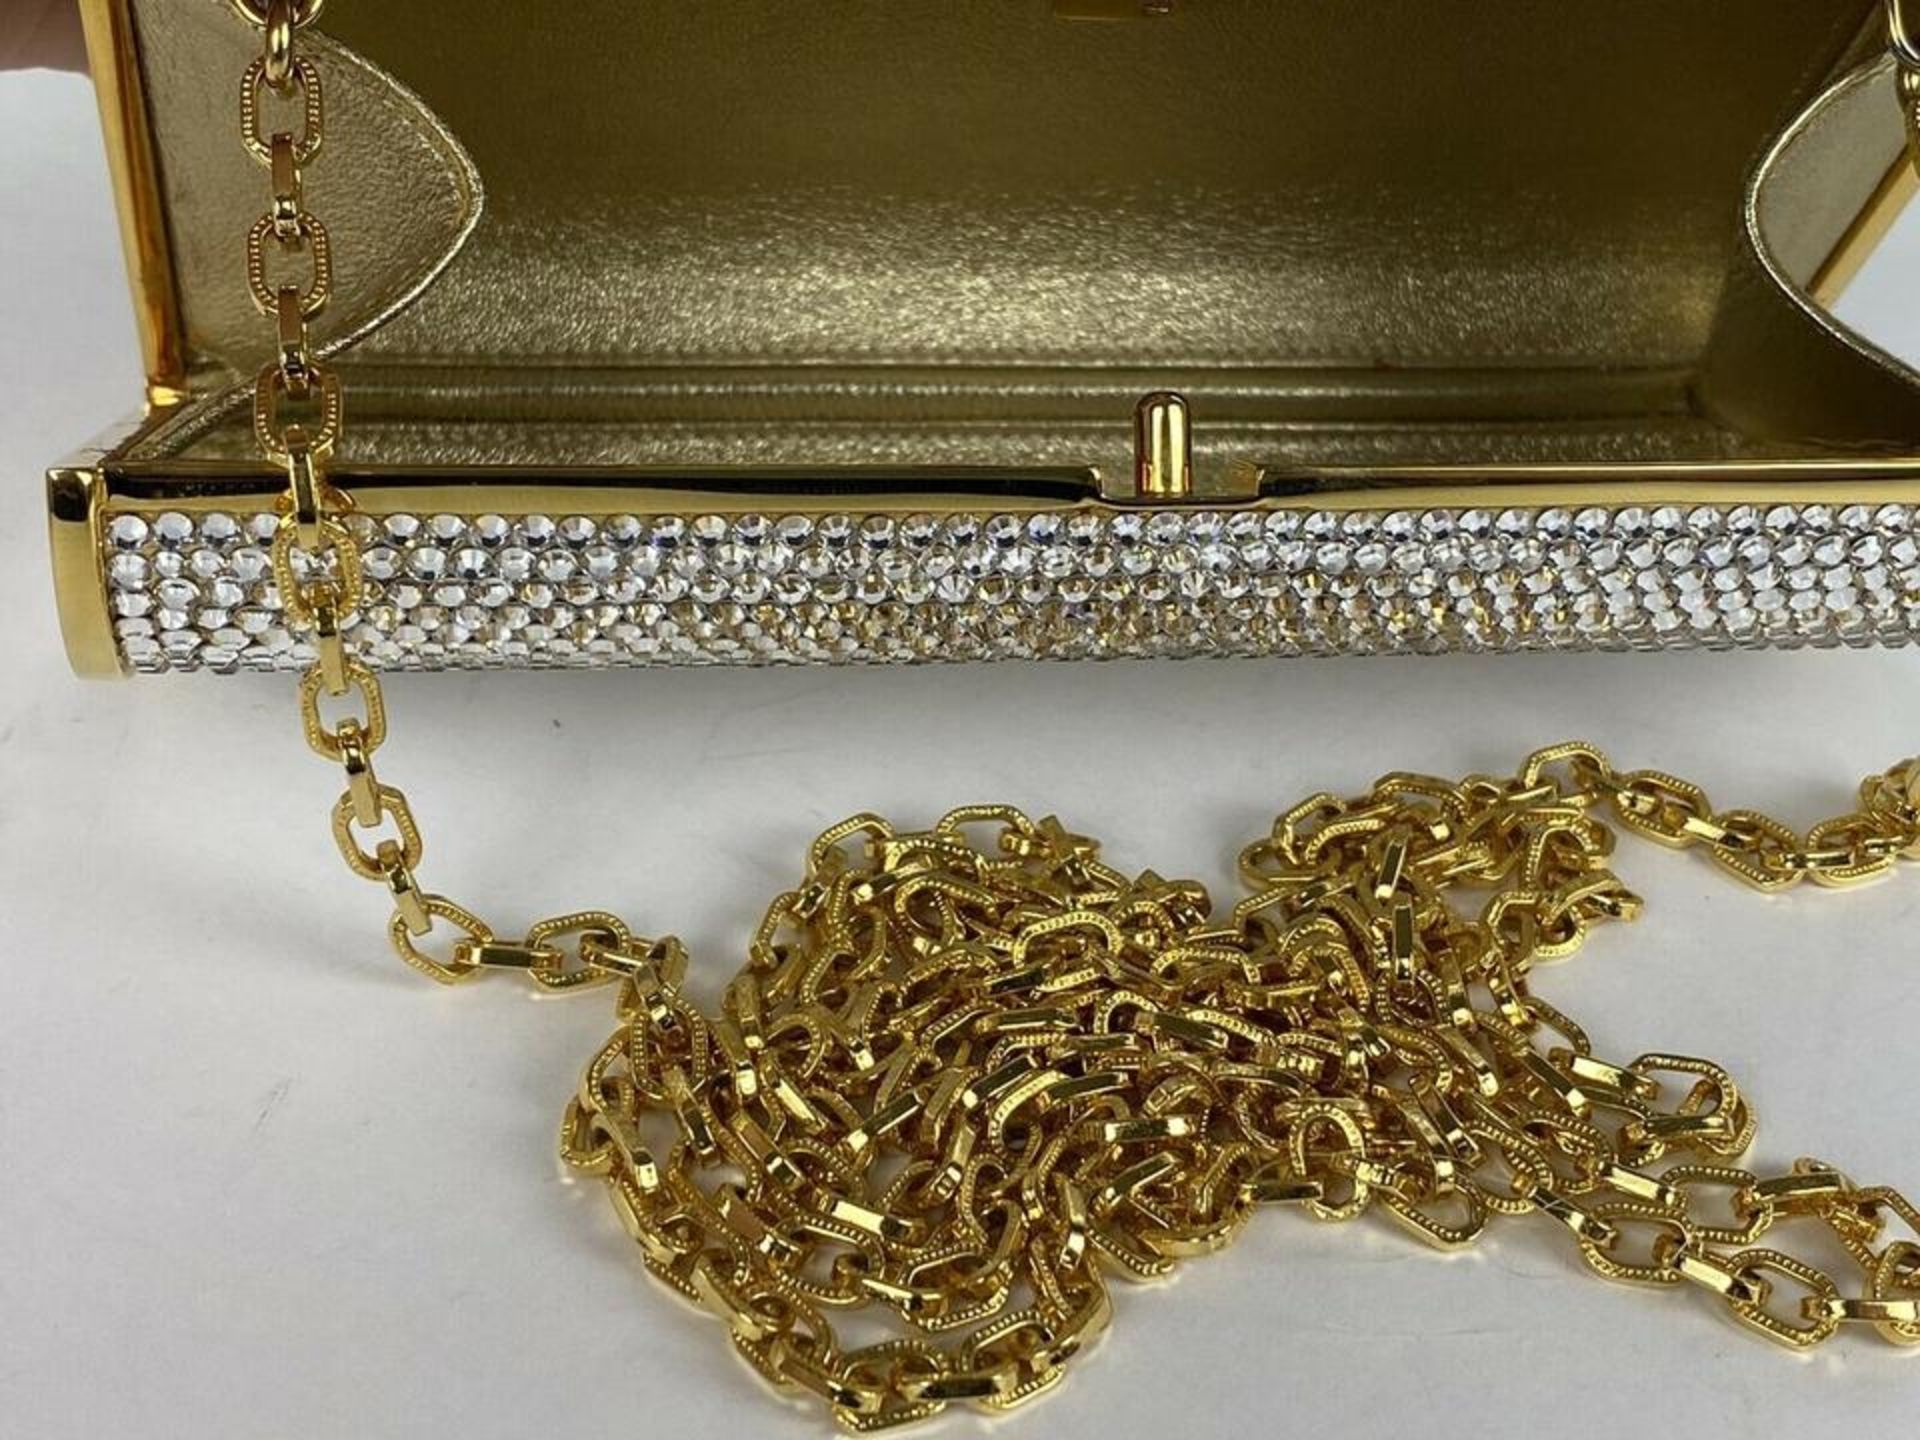 JUDITH LEIBER FULL BEAD CRYSTAL MINAUDIERE GOLD SILVER CHAIN CROSSBODY EVENING - Image 5 of 9